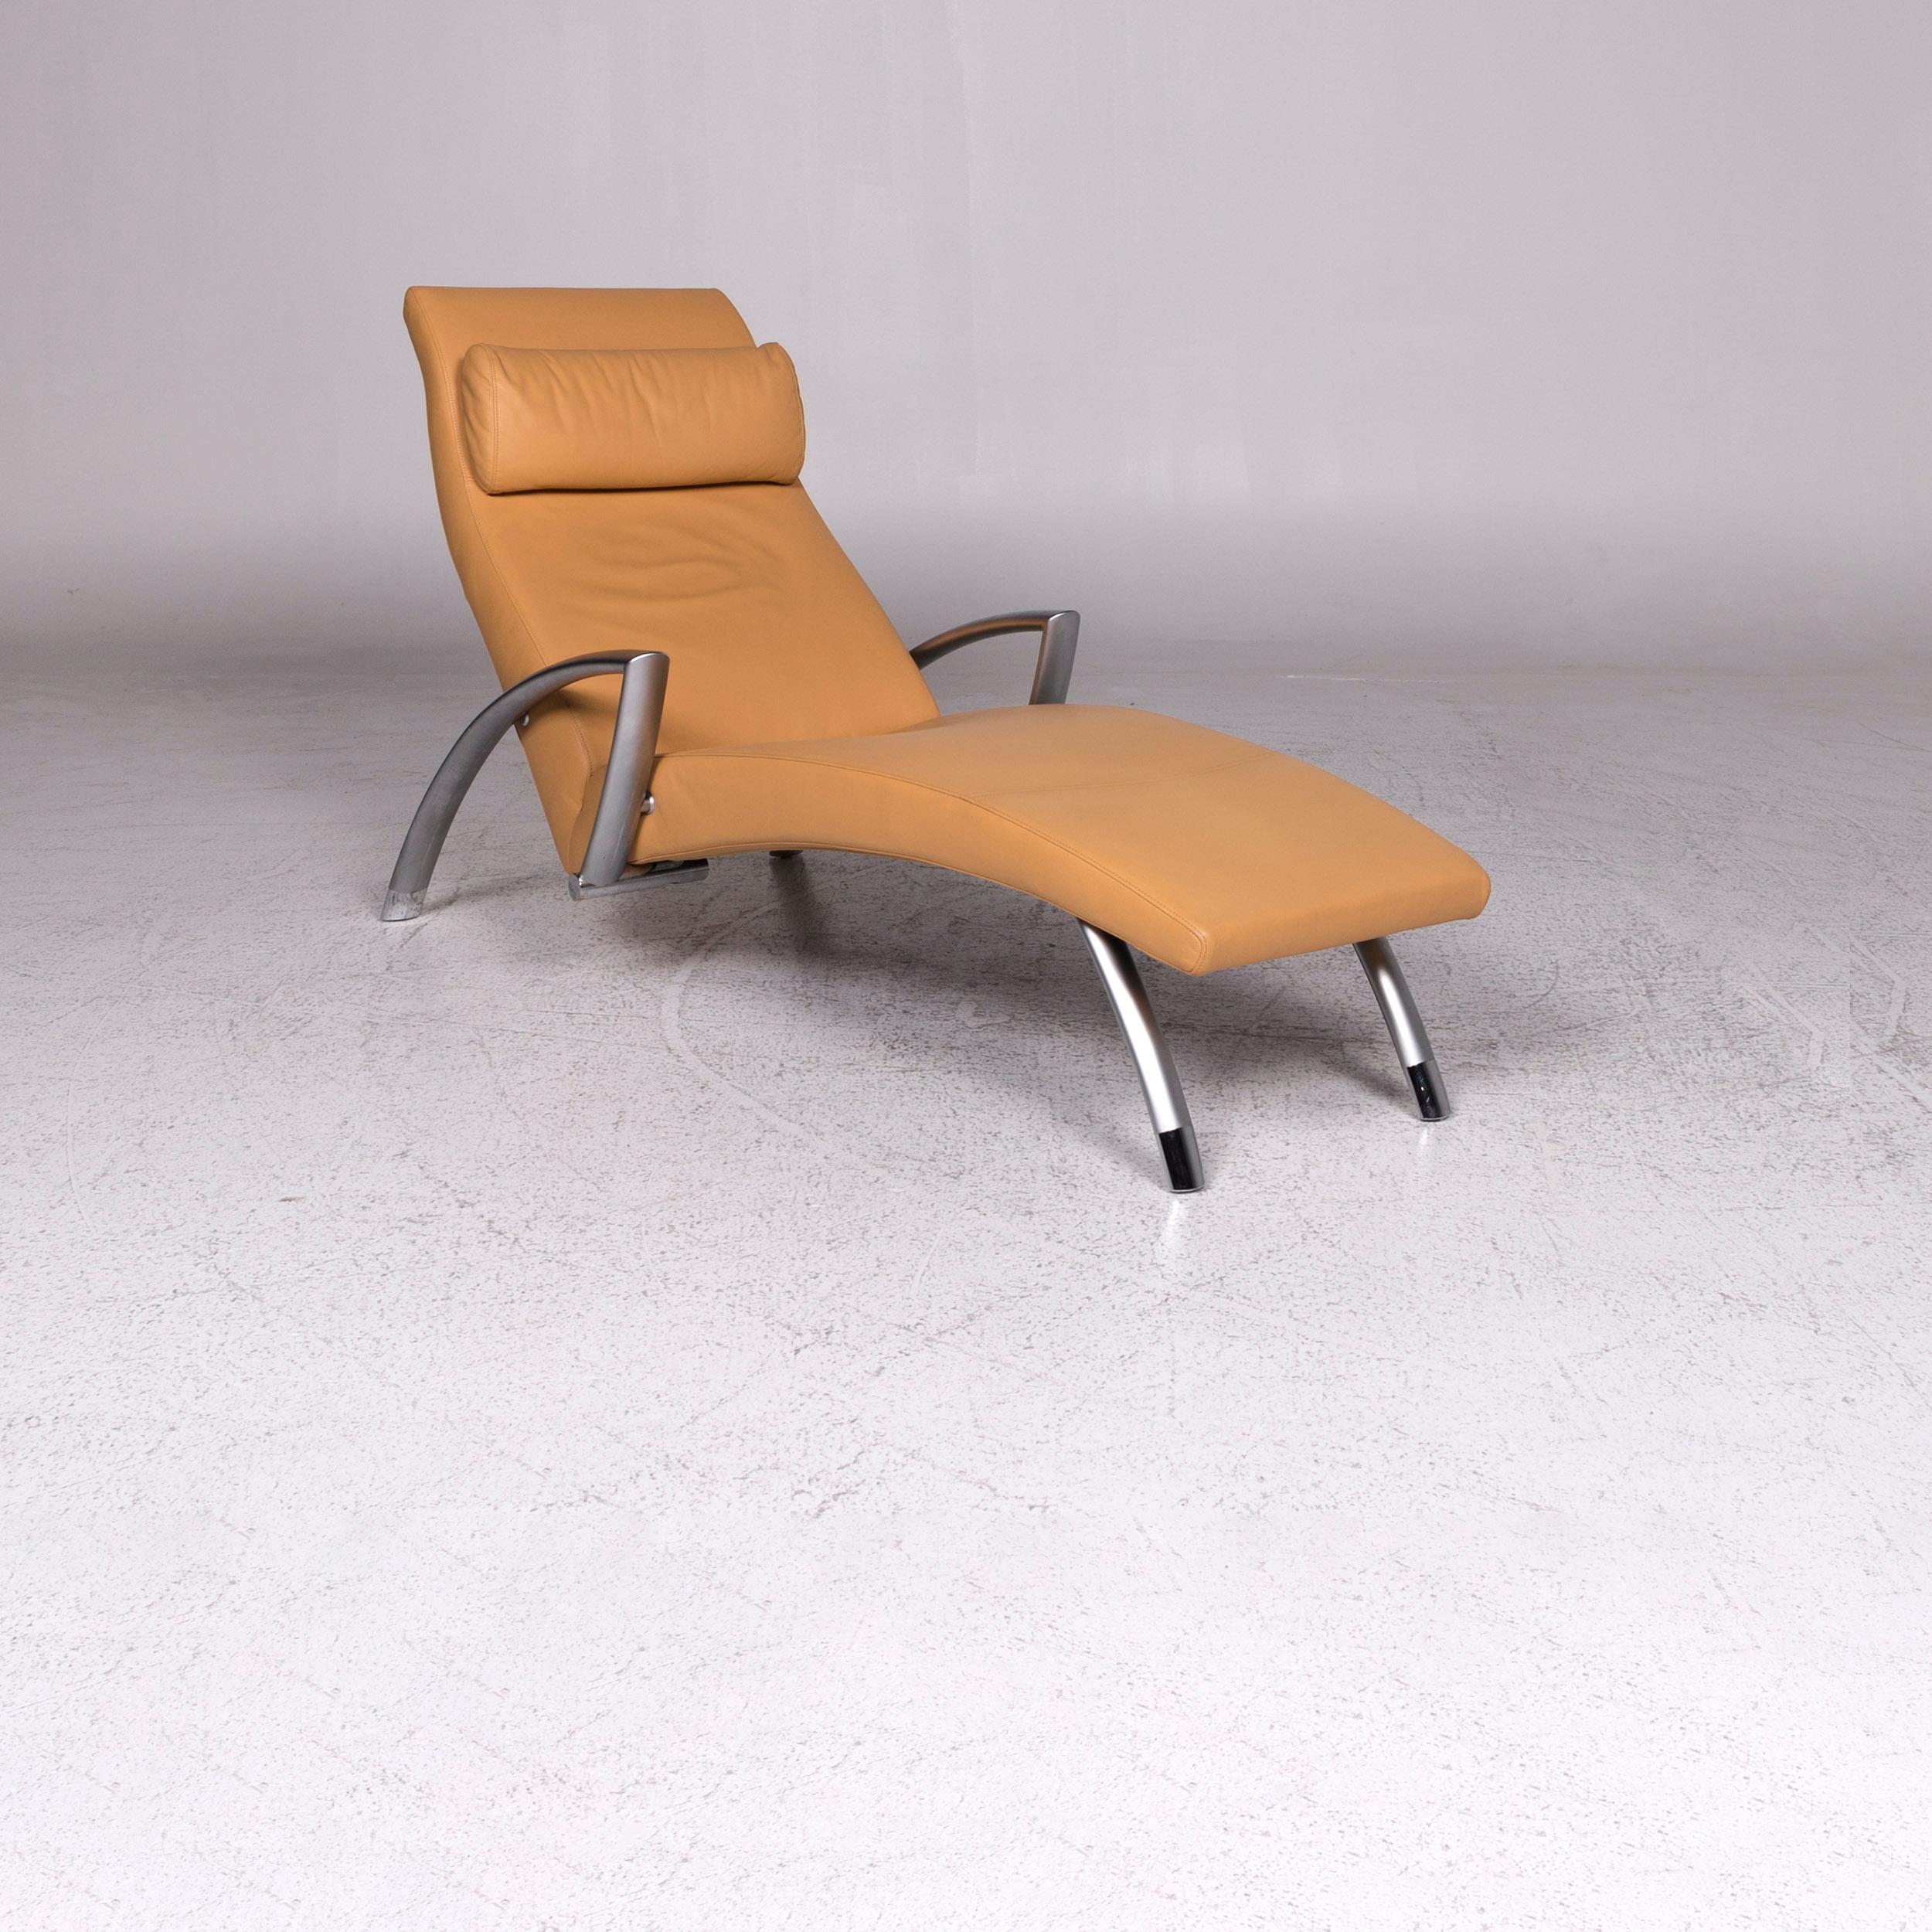 We bring to you a Rolf Benz 2600 leather lounger yellow relax.

Product measurements in centimeters:

Depth 169
Width 72
Height 90
Seat-height 38
Rest-height 46
Seat-depth 113
Seat-width 57
Back-height 64.
                 